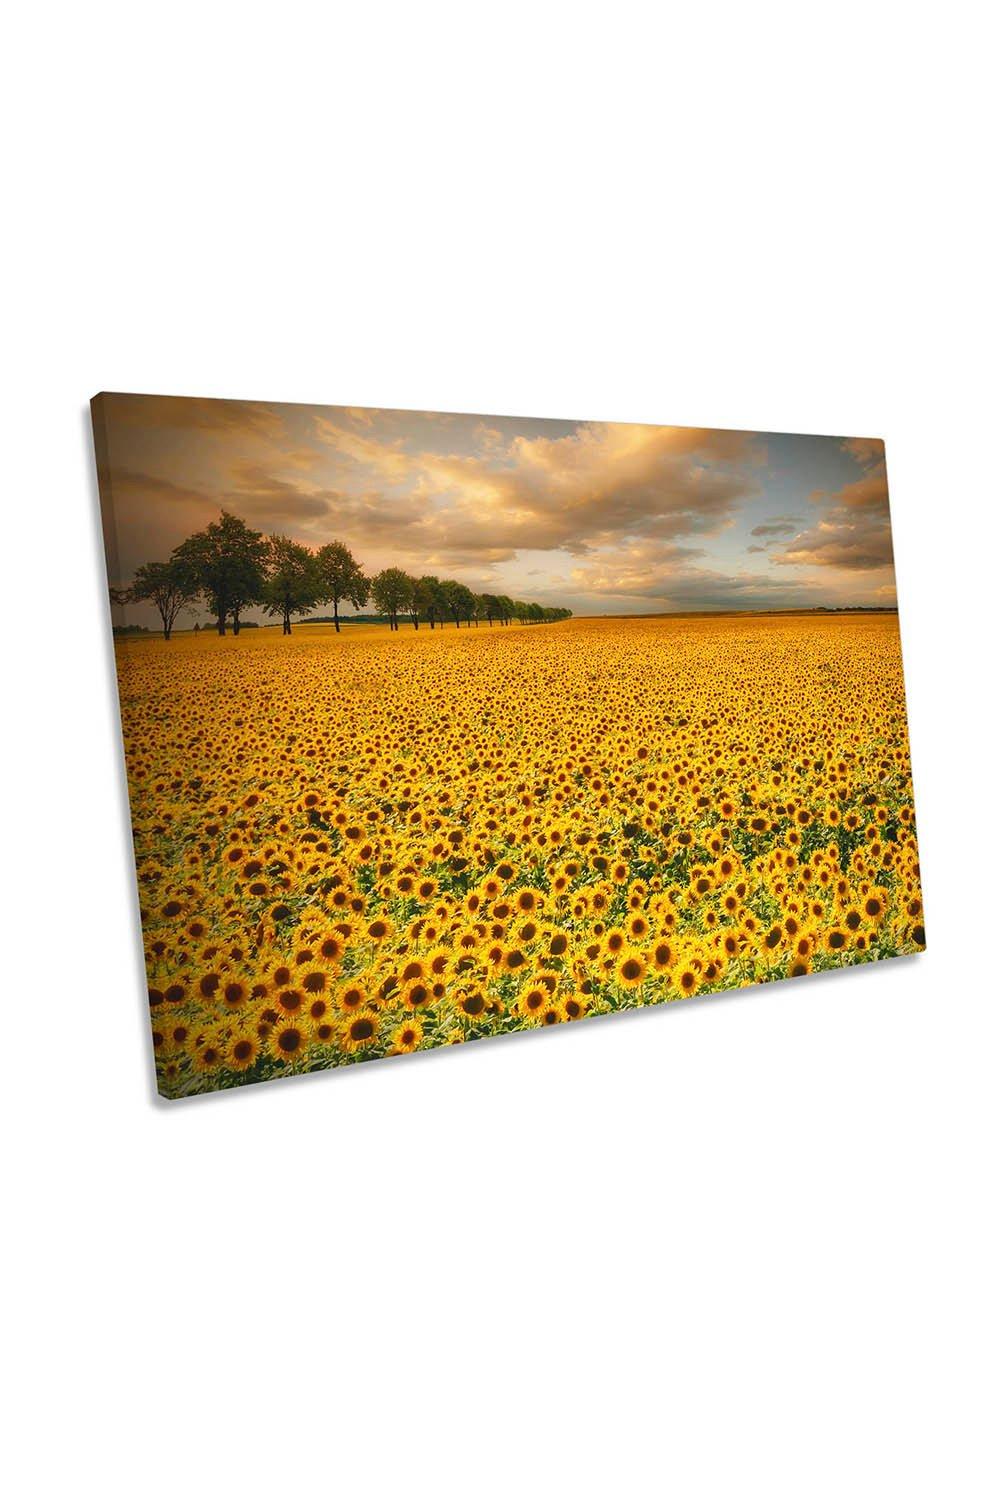 Sunflower Field Floral Flowers Canvas Wall Art Picture Print